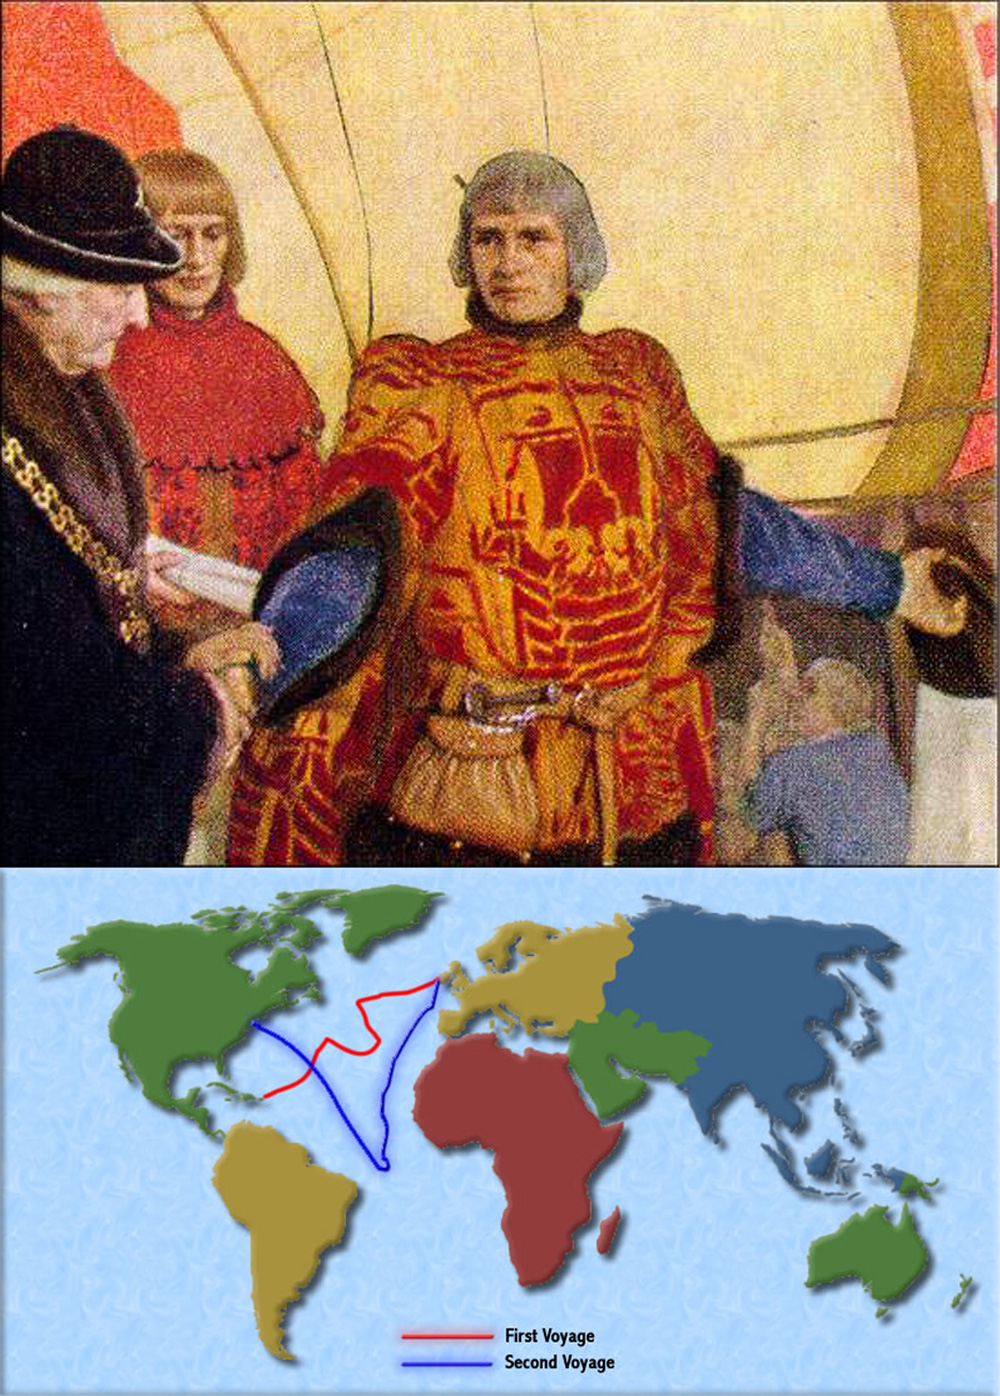 John Cabot (1450 – 1499) was an Italian navigator and explorer whose 1497 discovery of parts of North America under the commission of Henry VII of England is commonly held to have been the first European encounter with the mainland of North America since the Norse Vikings visits to Vinland in the eleventh century